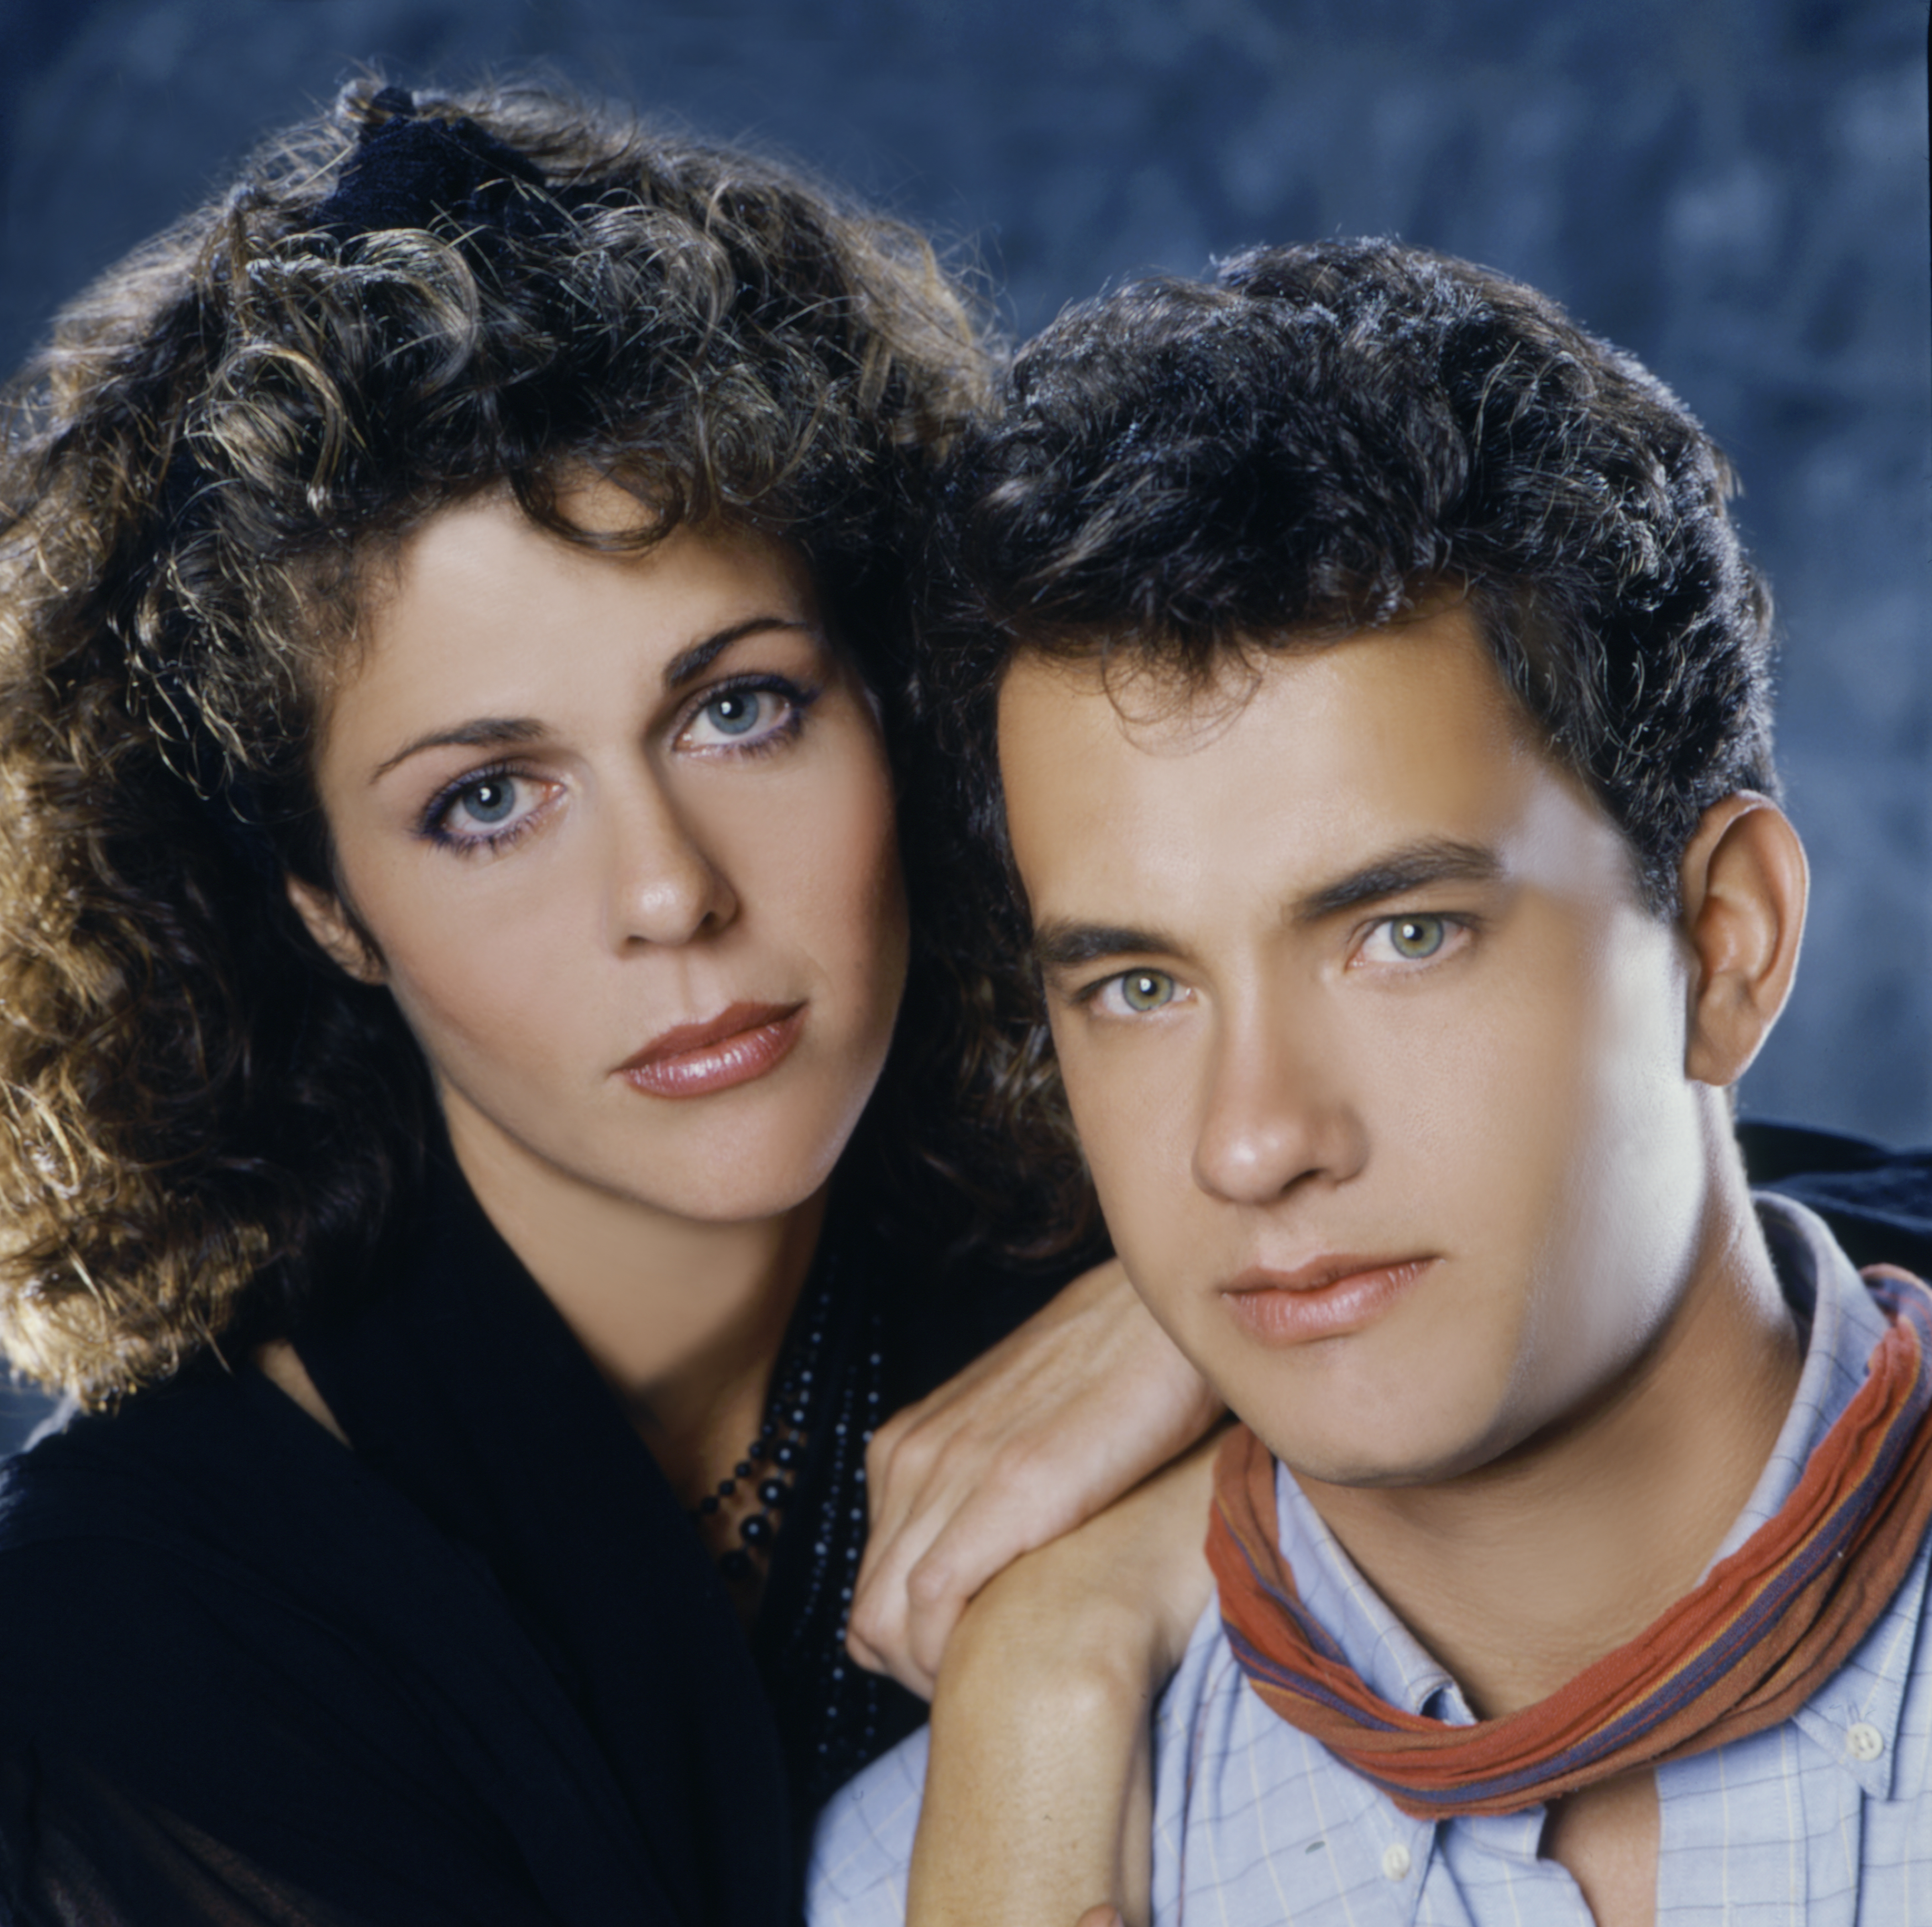 Rita Wilson and Tom Hanks during the filming of "Volunteers" on January 1, 1985 | Source: Getty Images